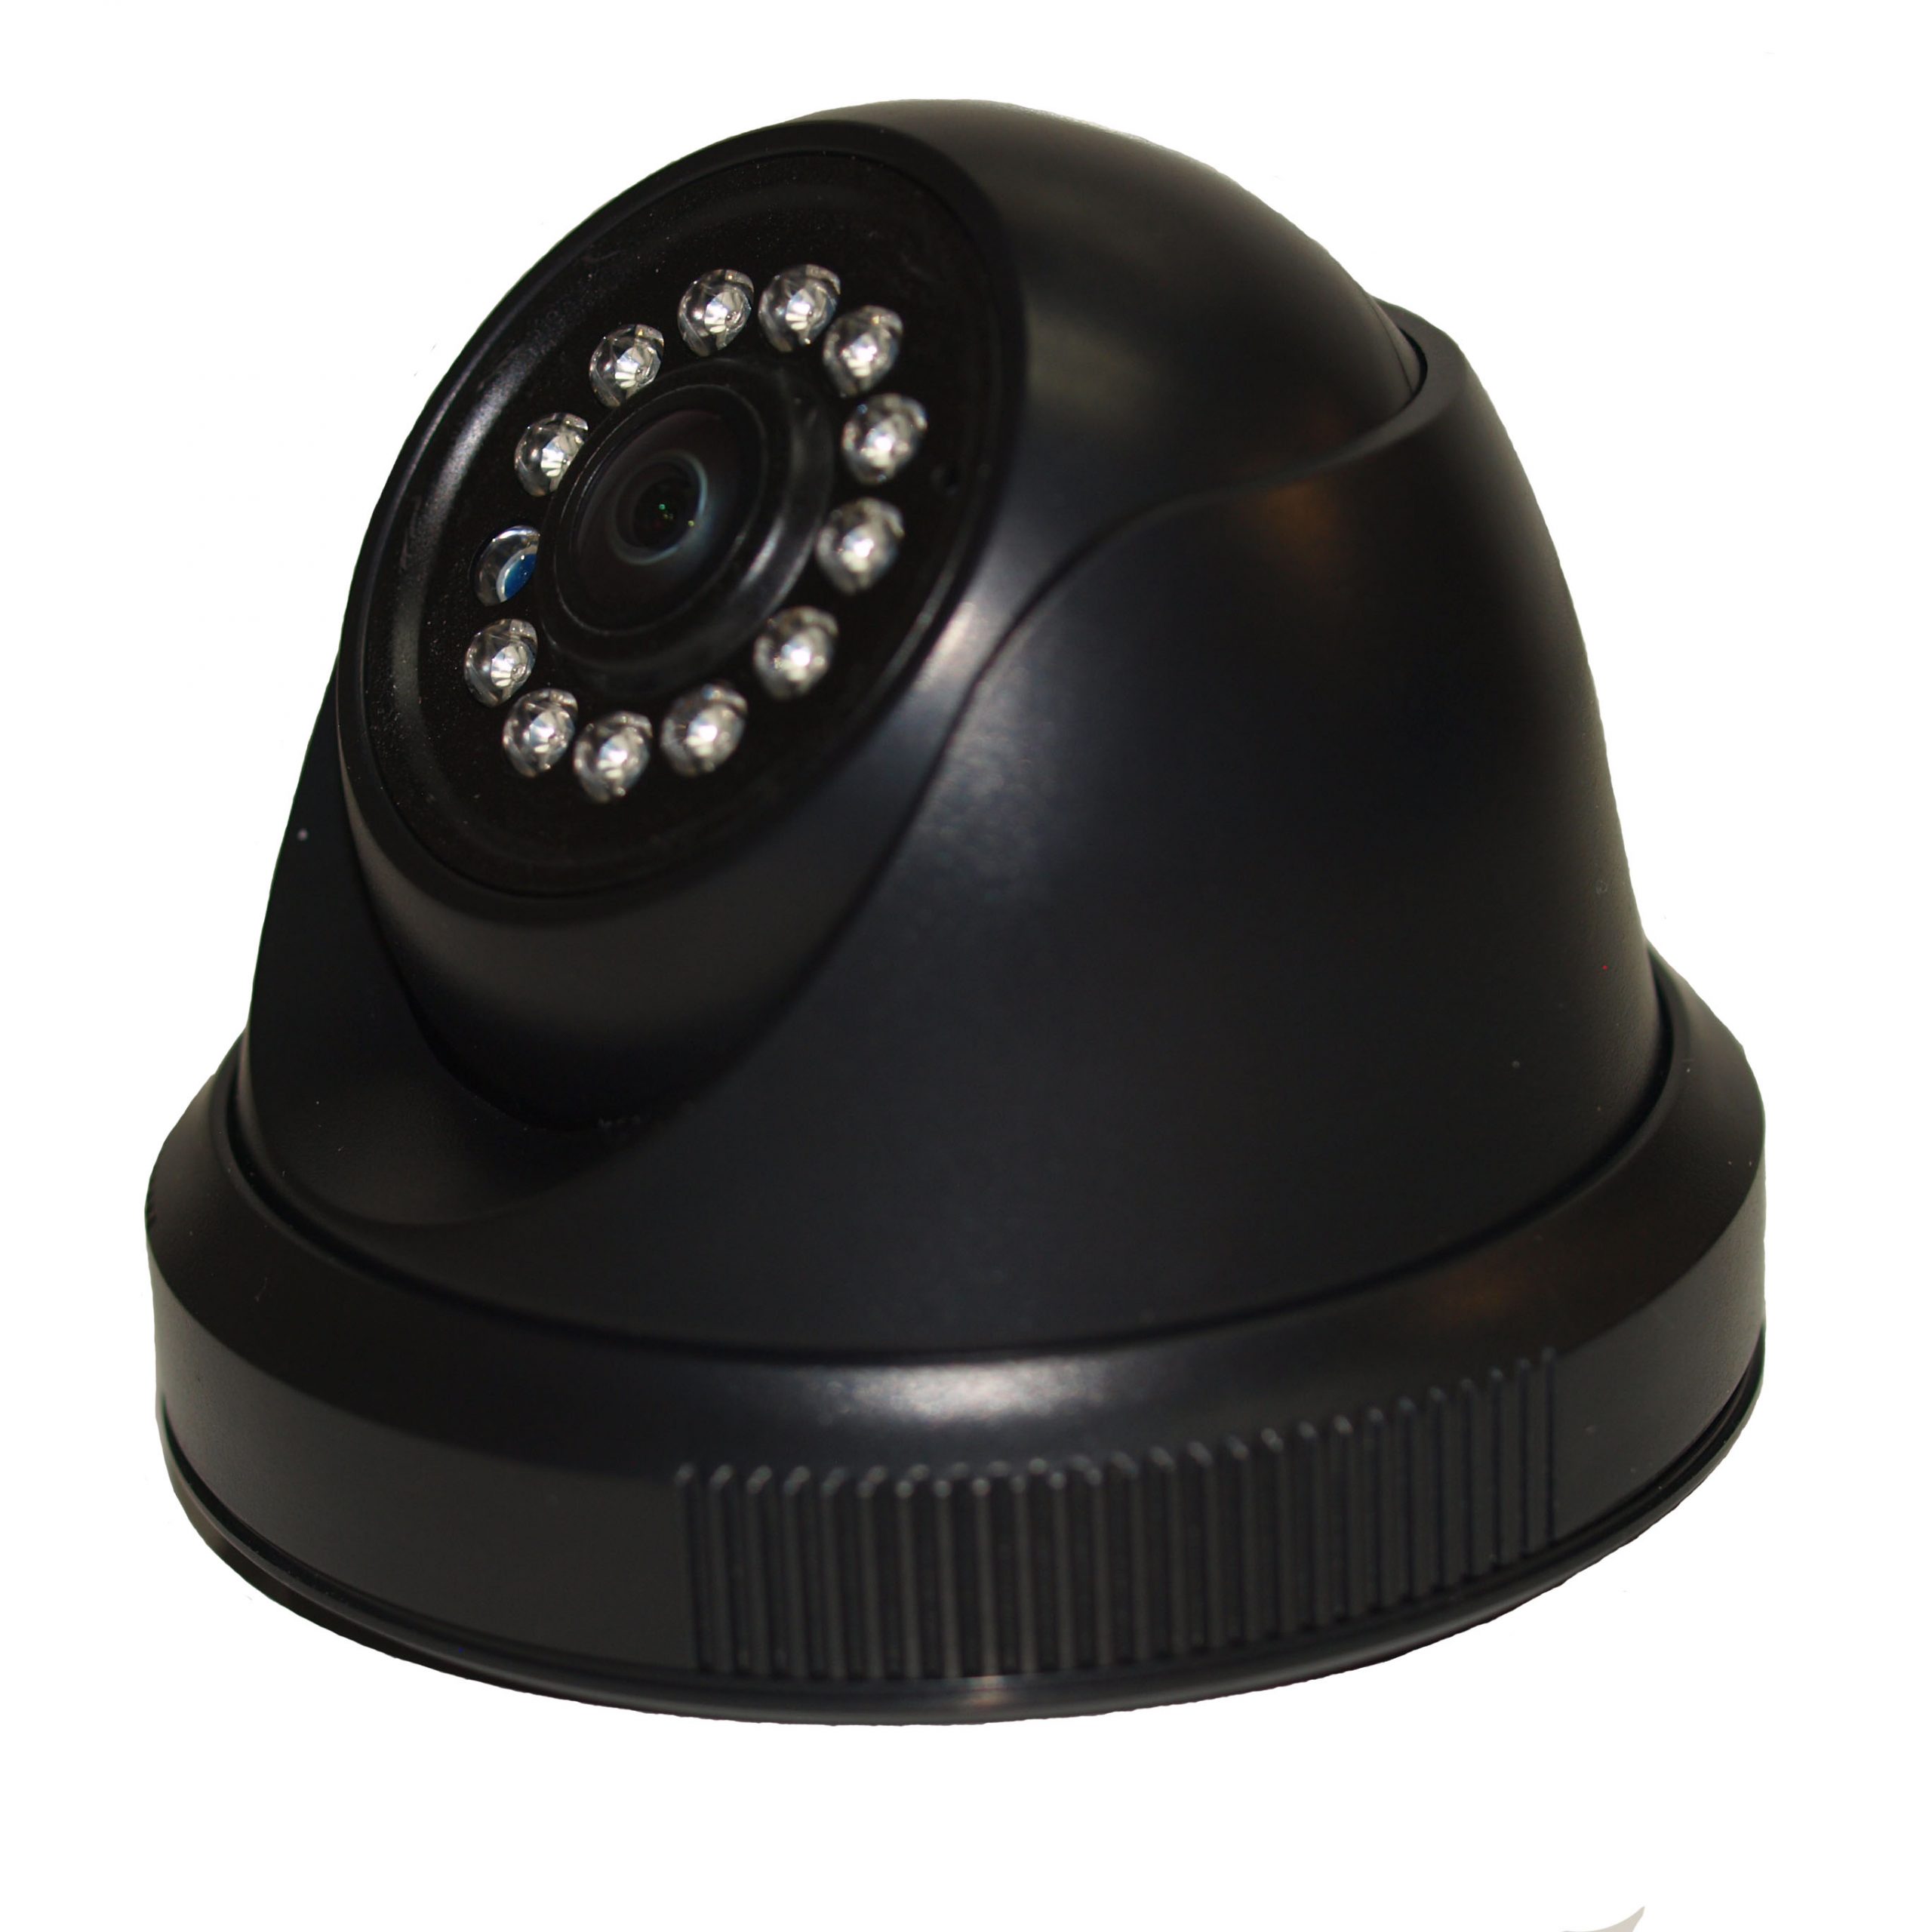 Side of BW601 Dome Camera